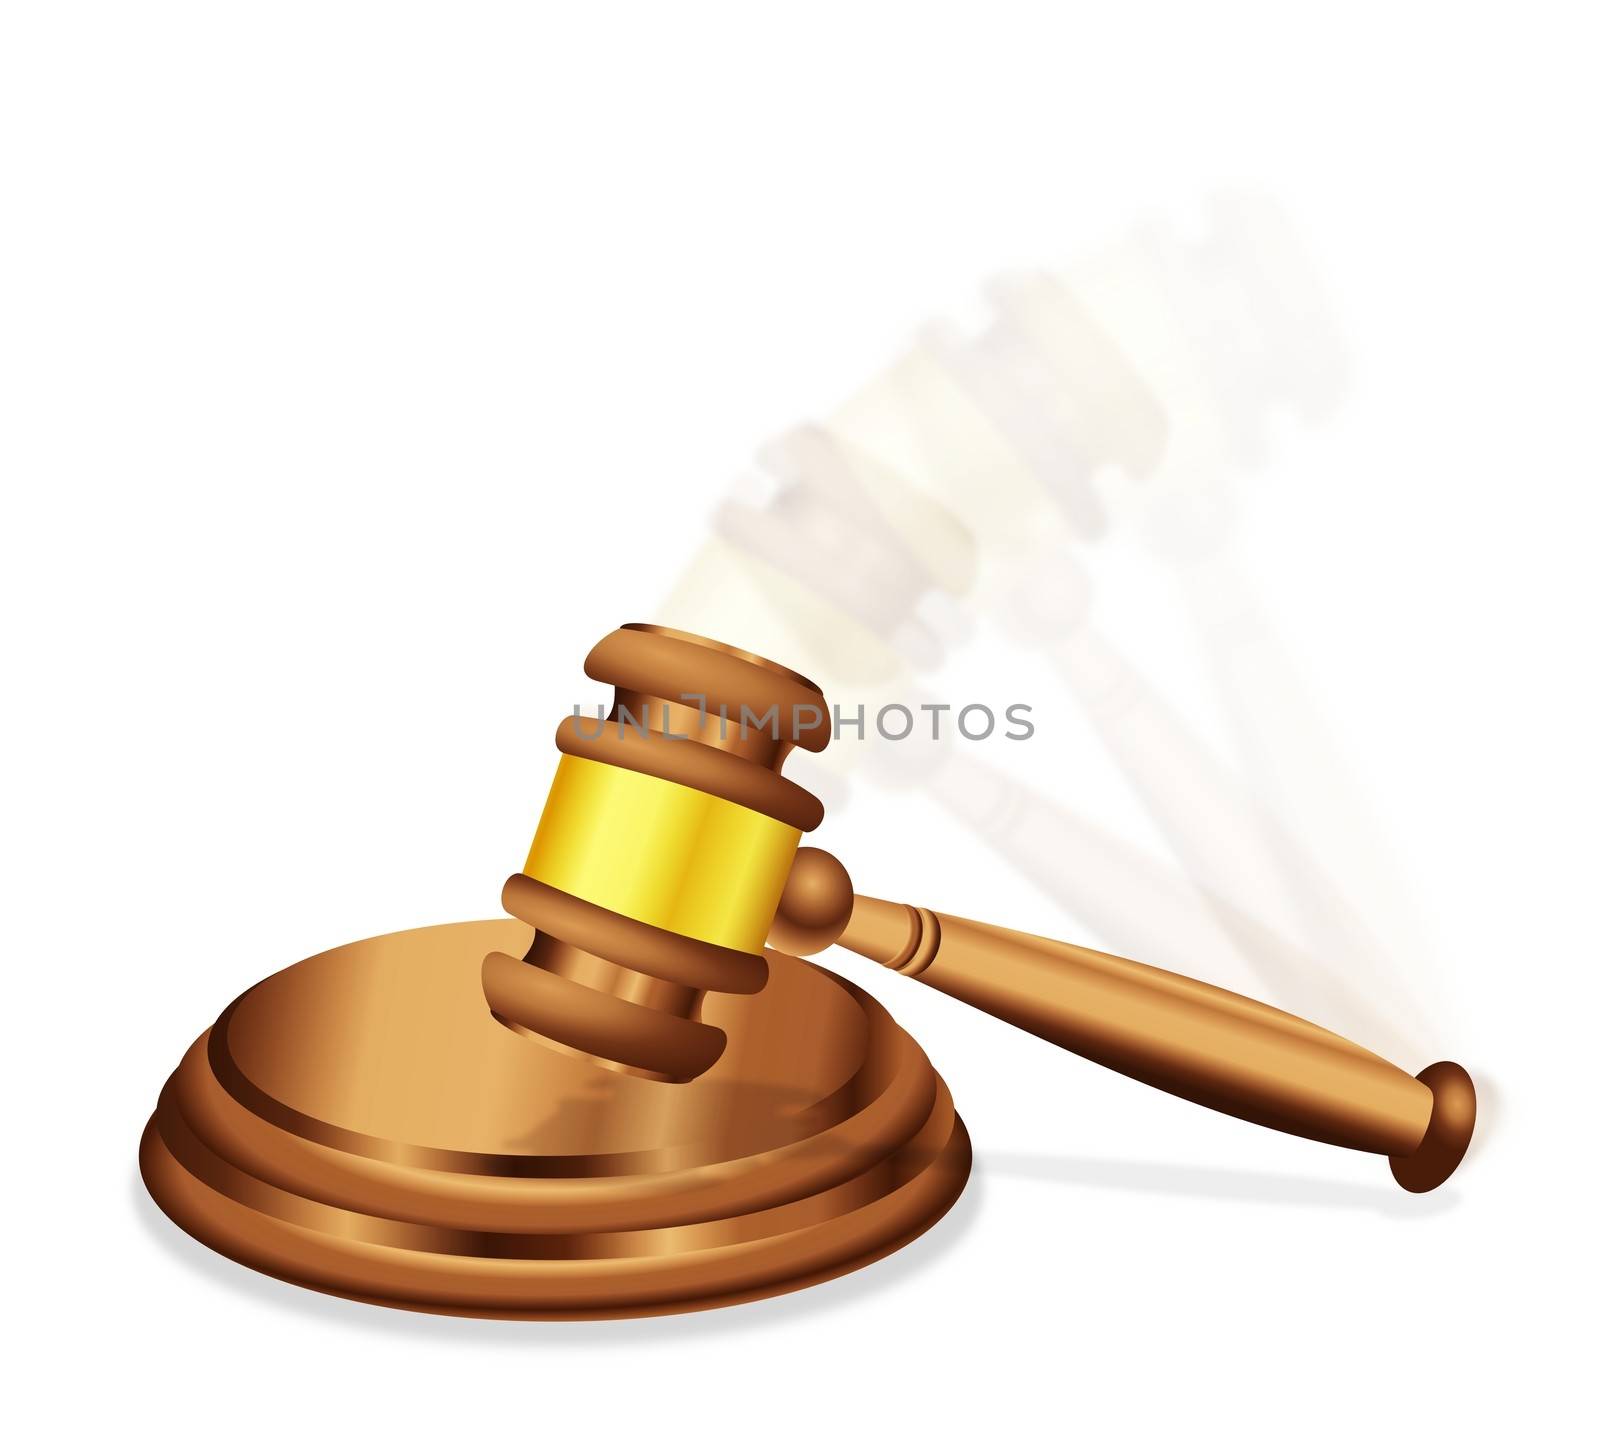 Final judgment or decision illustrated with a judges gavel mallet, with motion blur 
